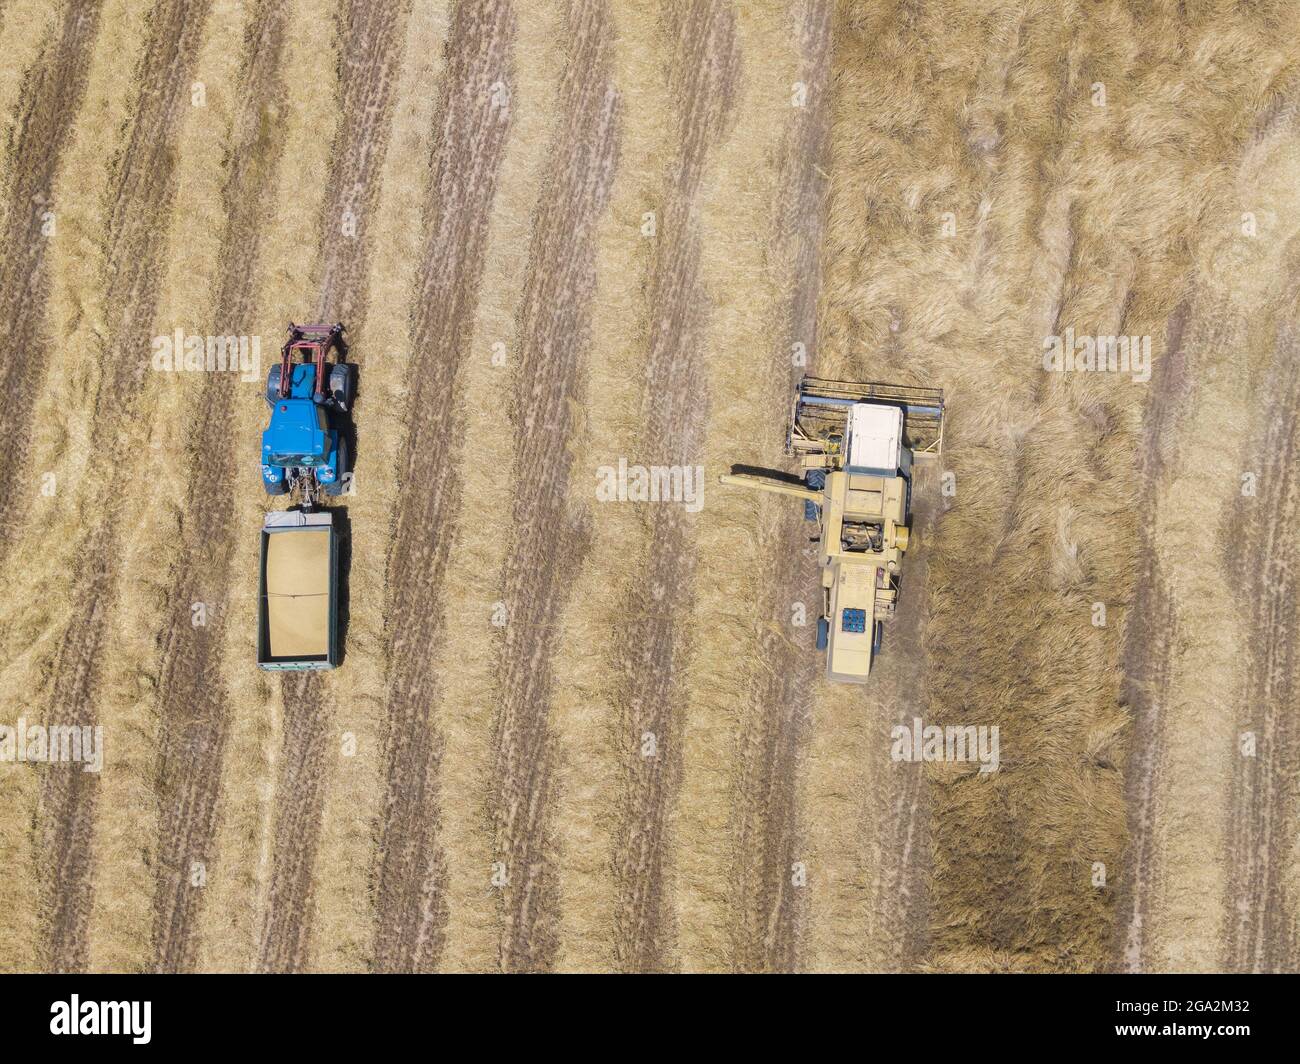 Aerial drone view of a yellow combine harvester and a blue tractor harvesting in a cereal field. View of the straw rows. Stock Photo